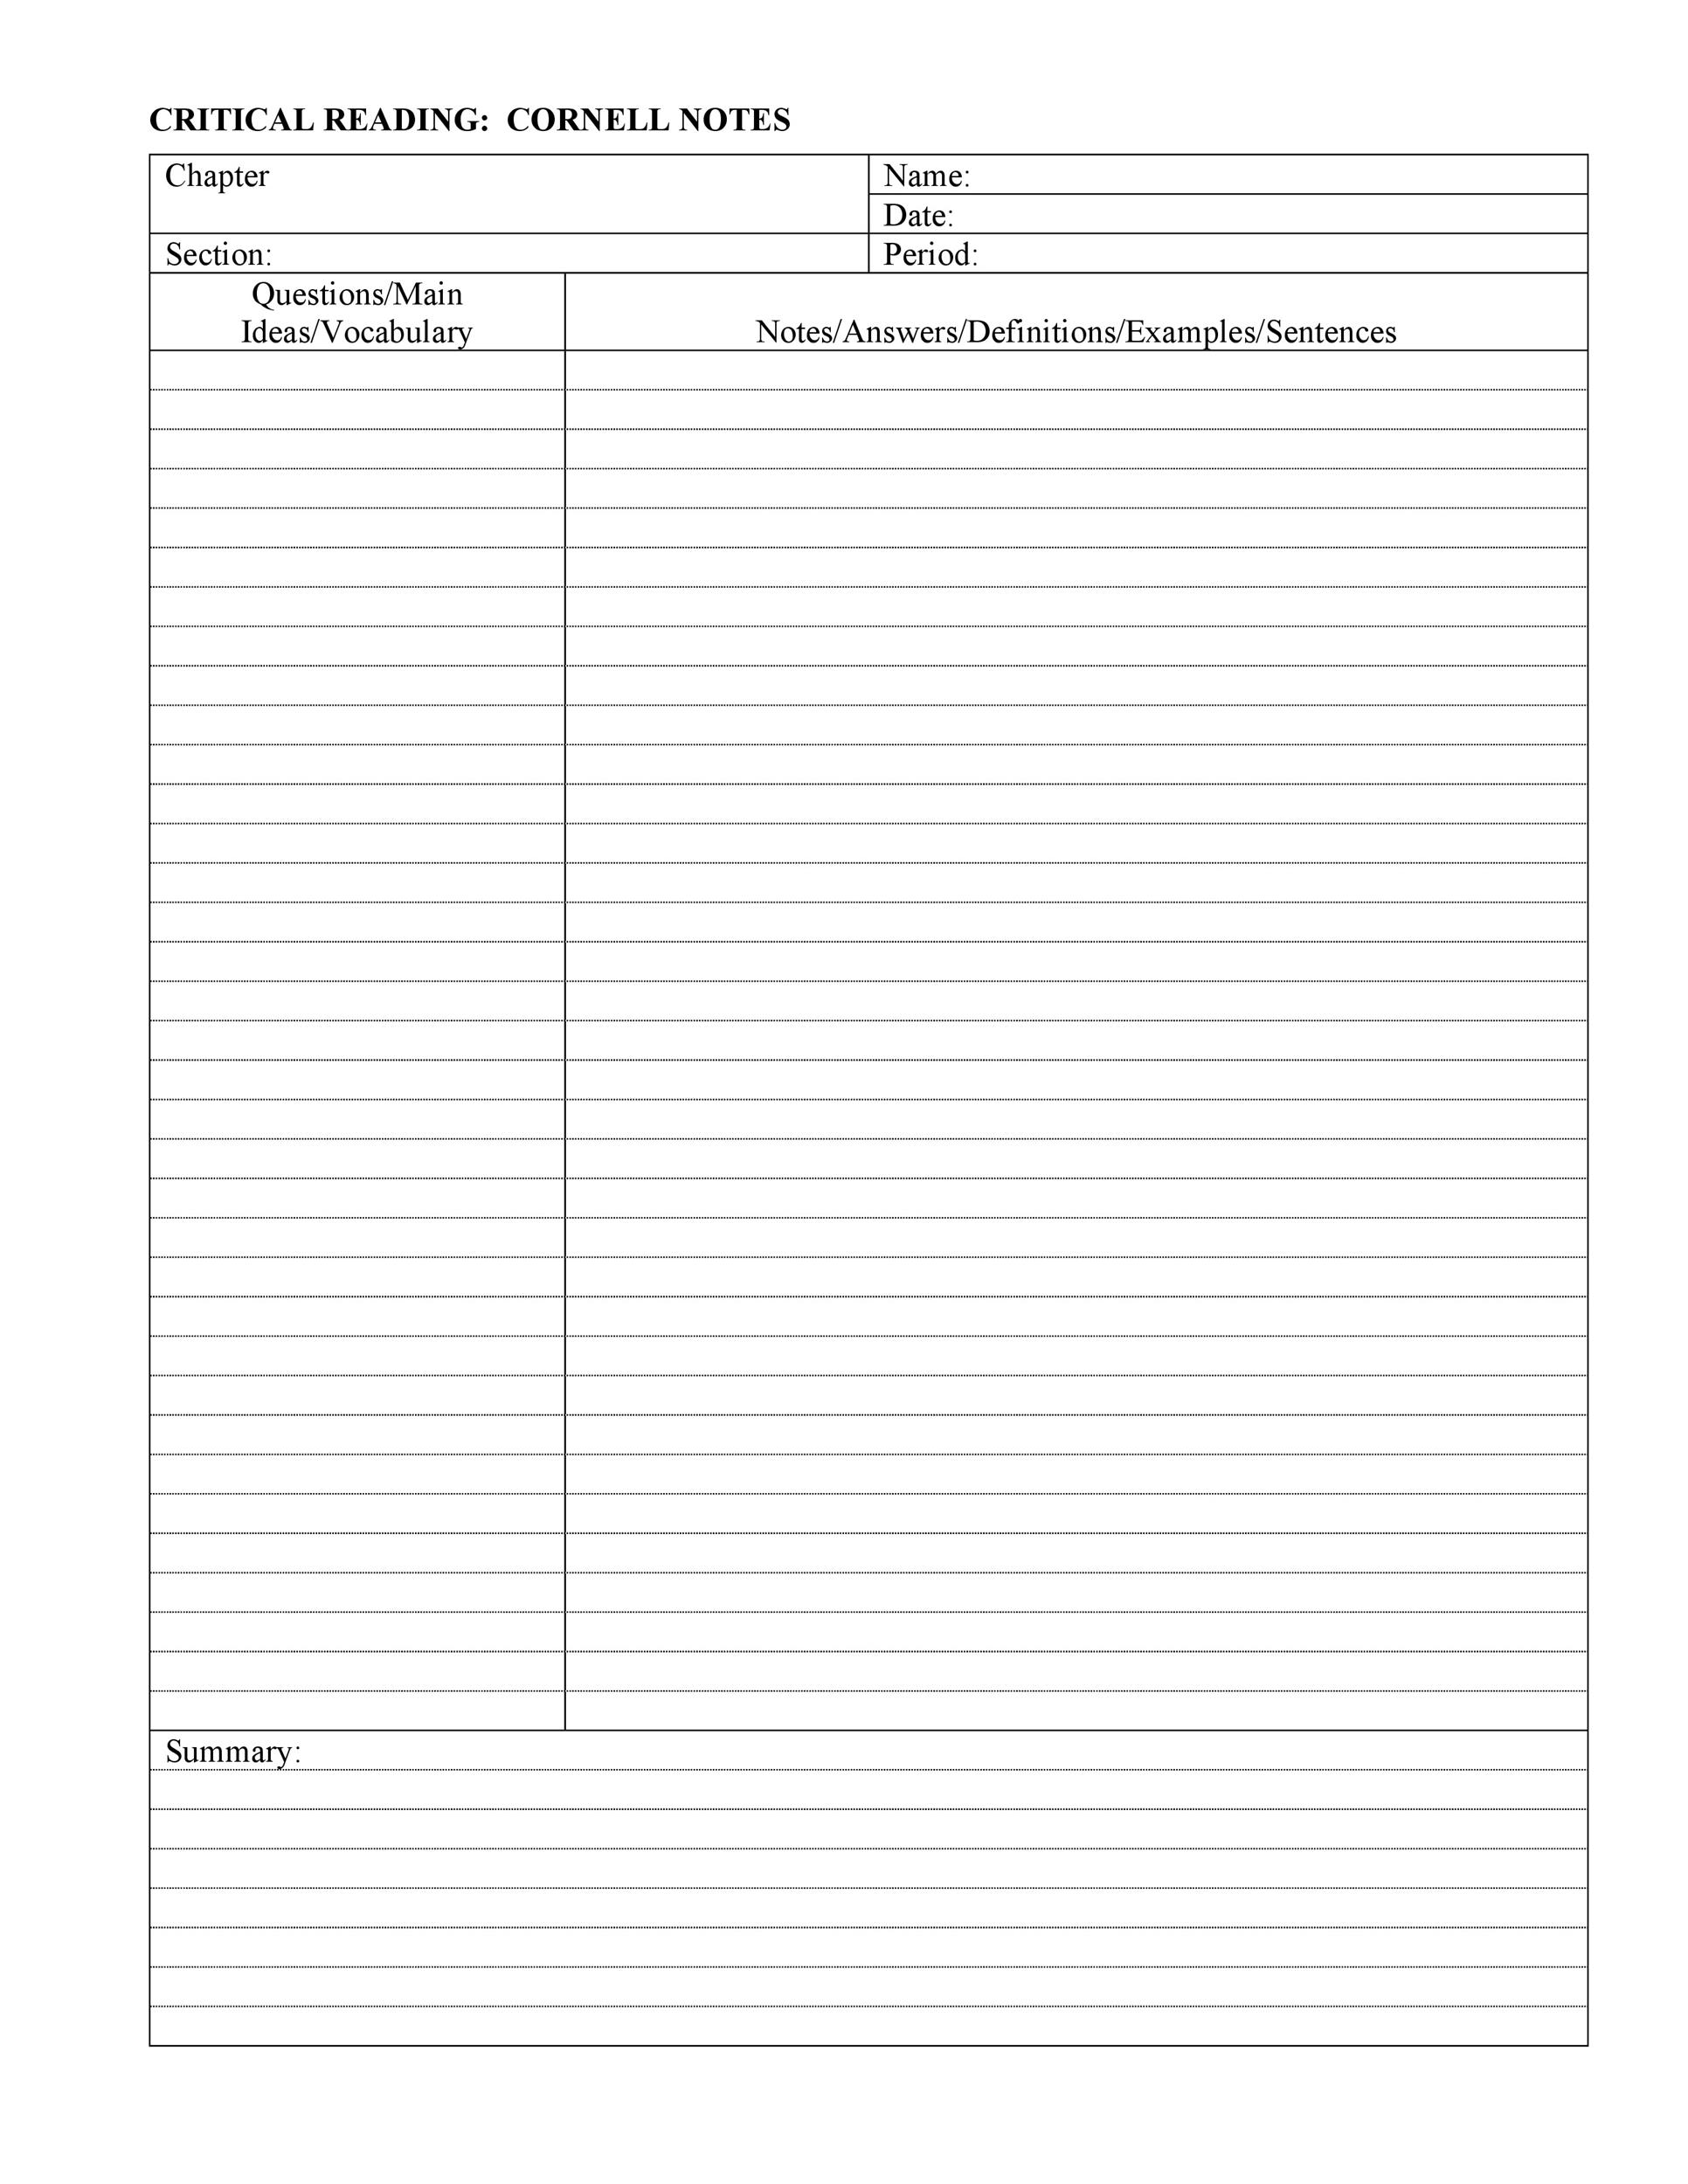 Free Cornell Notes Template 03